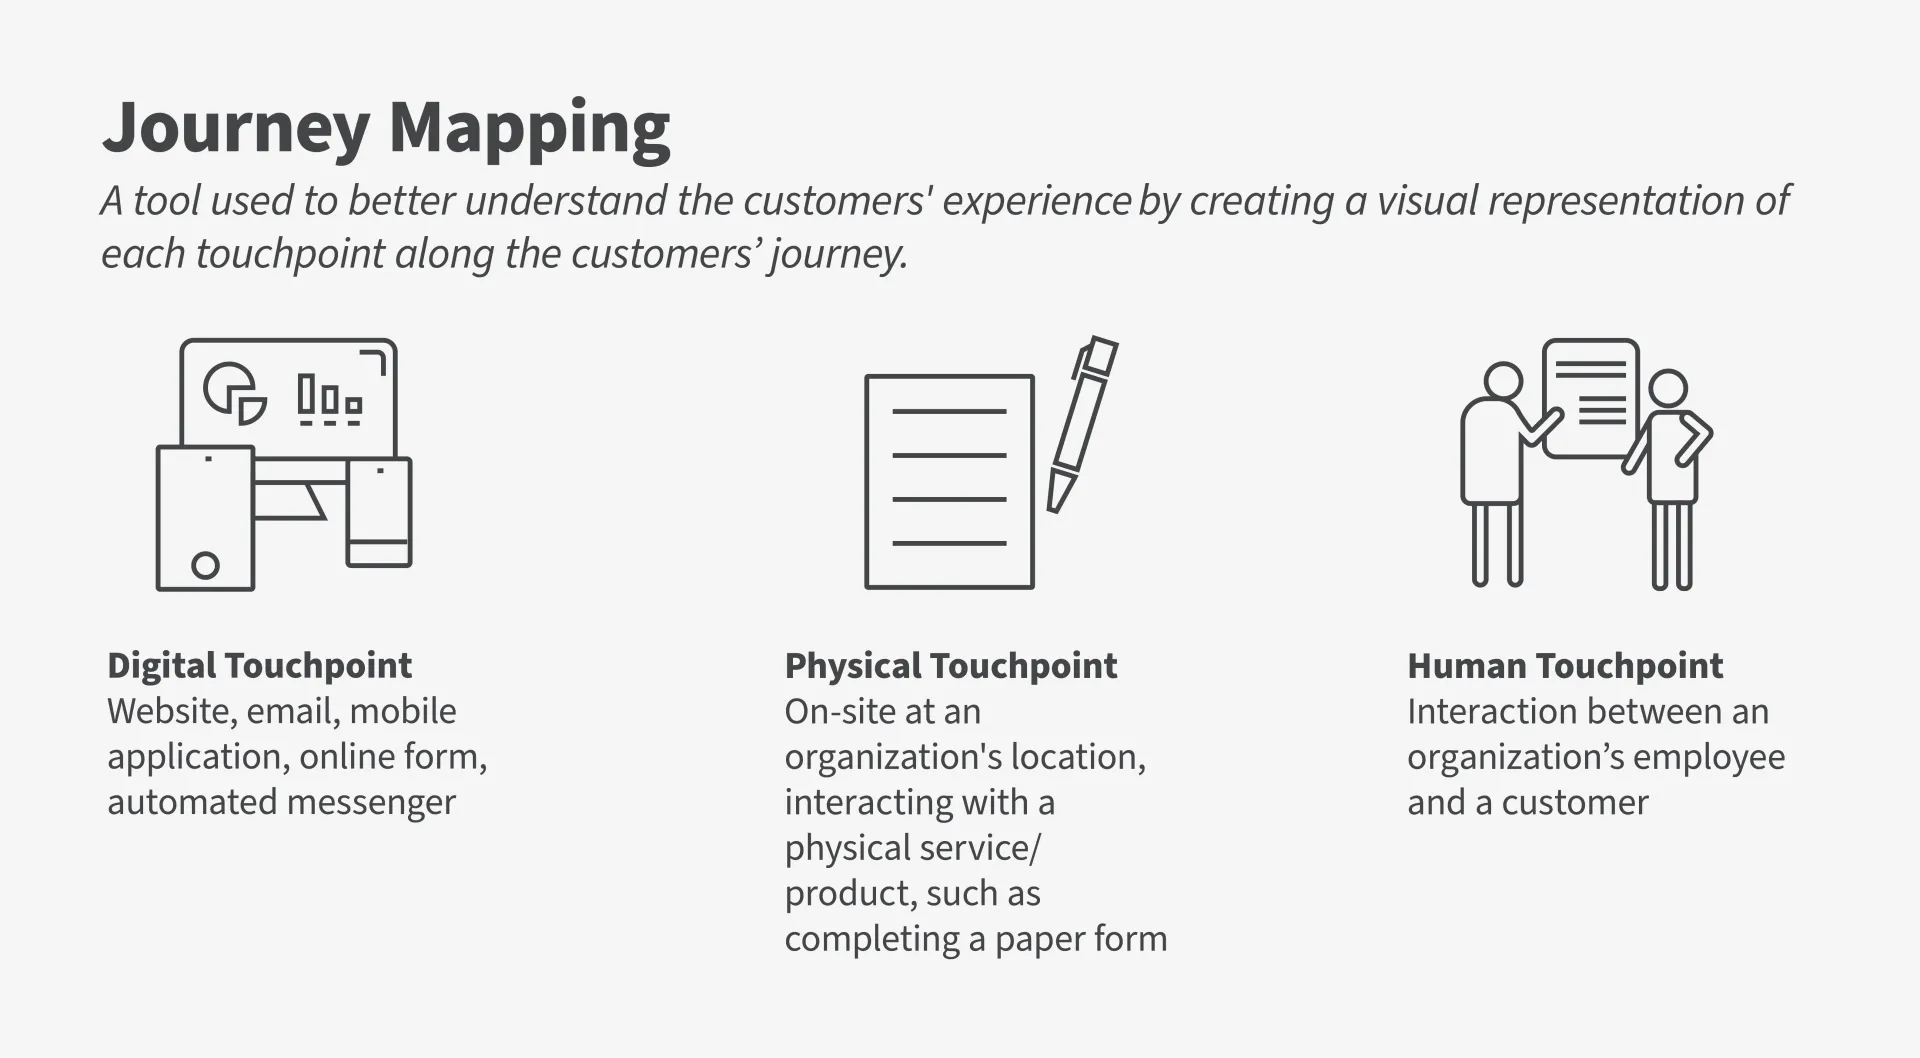 Infographic with three icons showing the three types of touchpoints being digital, physical, and human. 